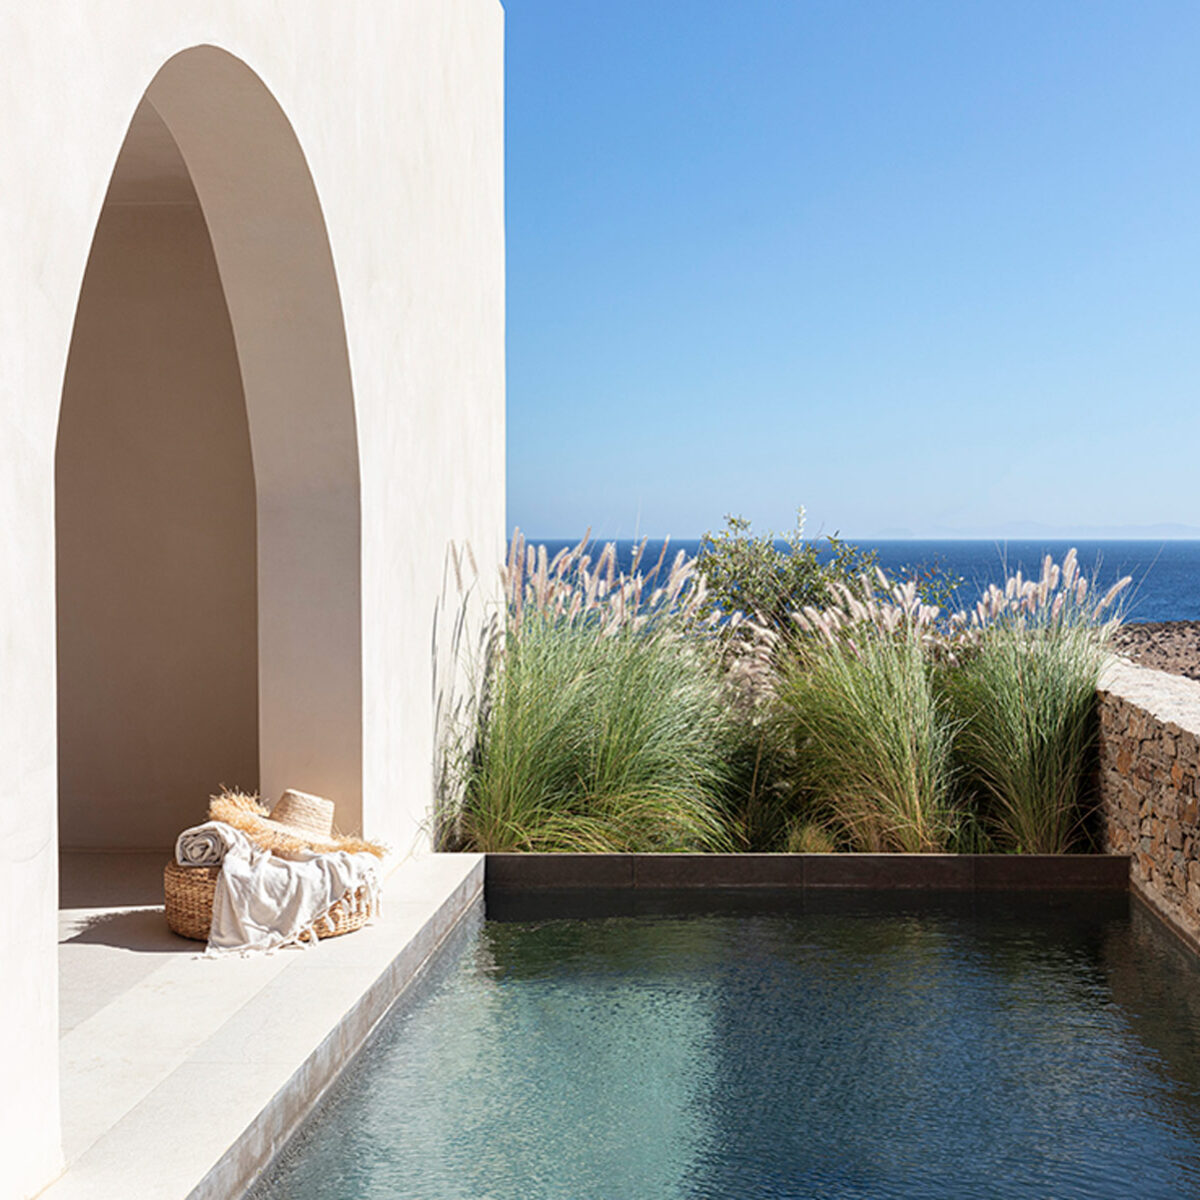 NOS, a peaceful hideaway in the island of Sifnos